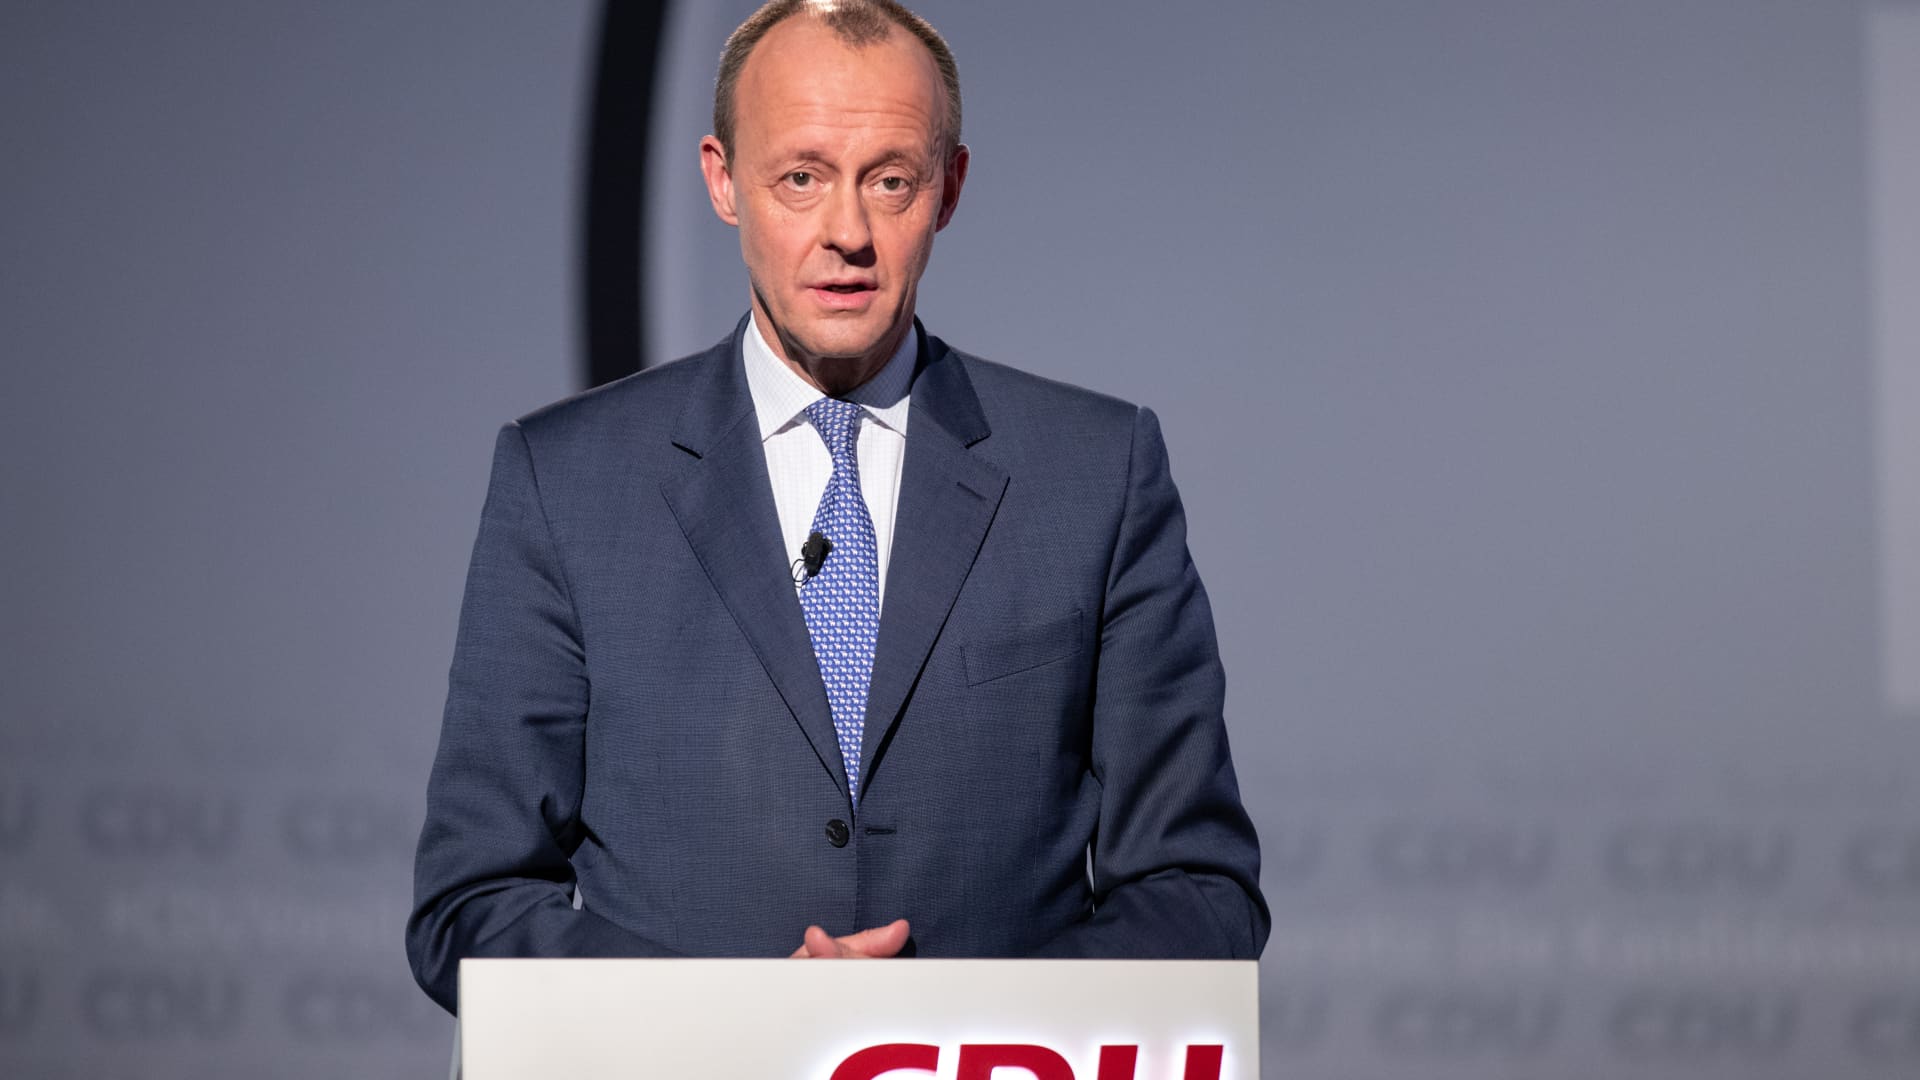 Friedrich Merz, candidate for the presidency of Germany's Christian Democratic Union (CDU), attends discussion with other candidates at CDU's headquarters on Jan. 8, 2021 in Berlin, Germany.